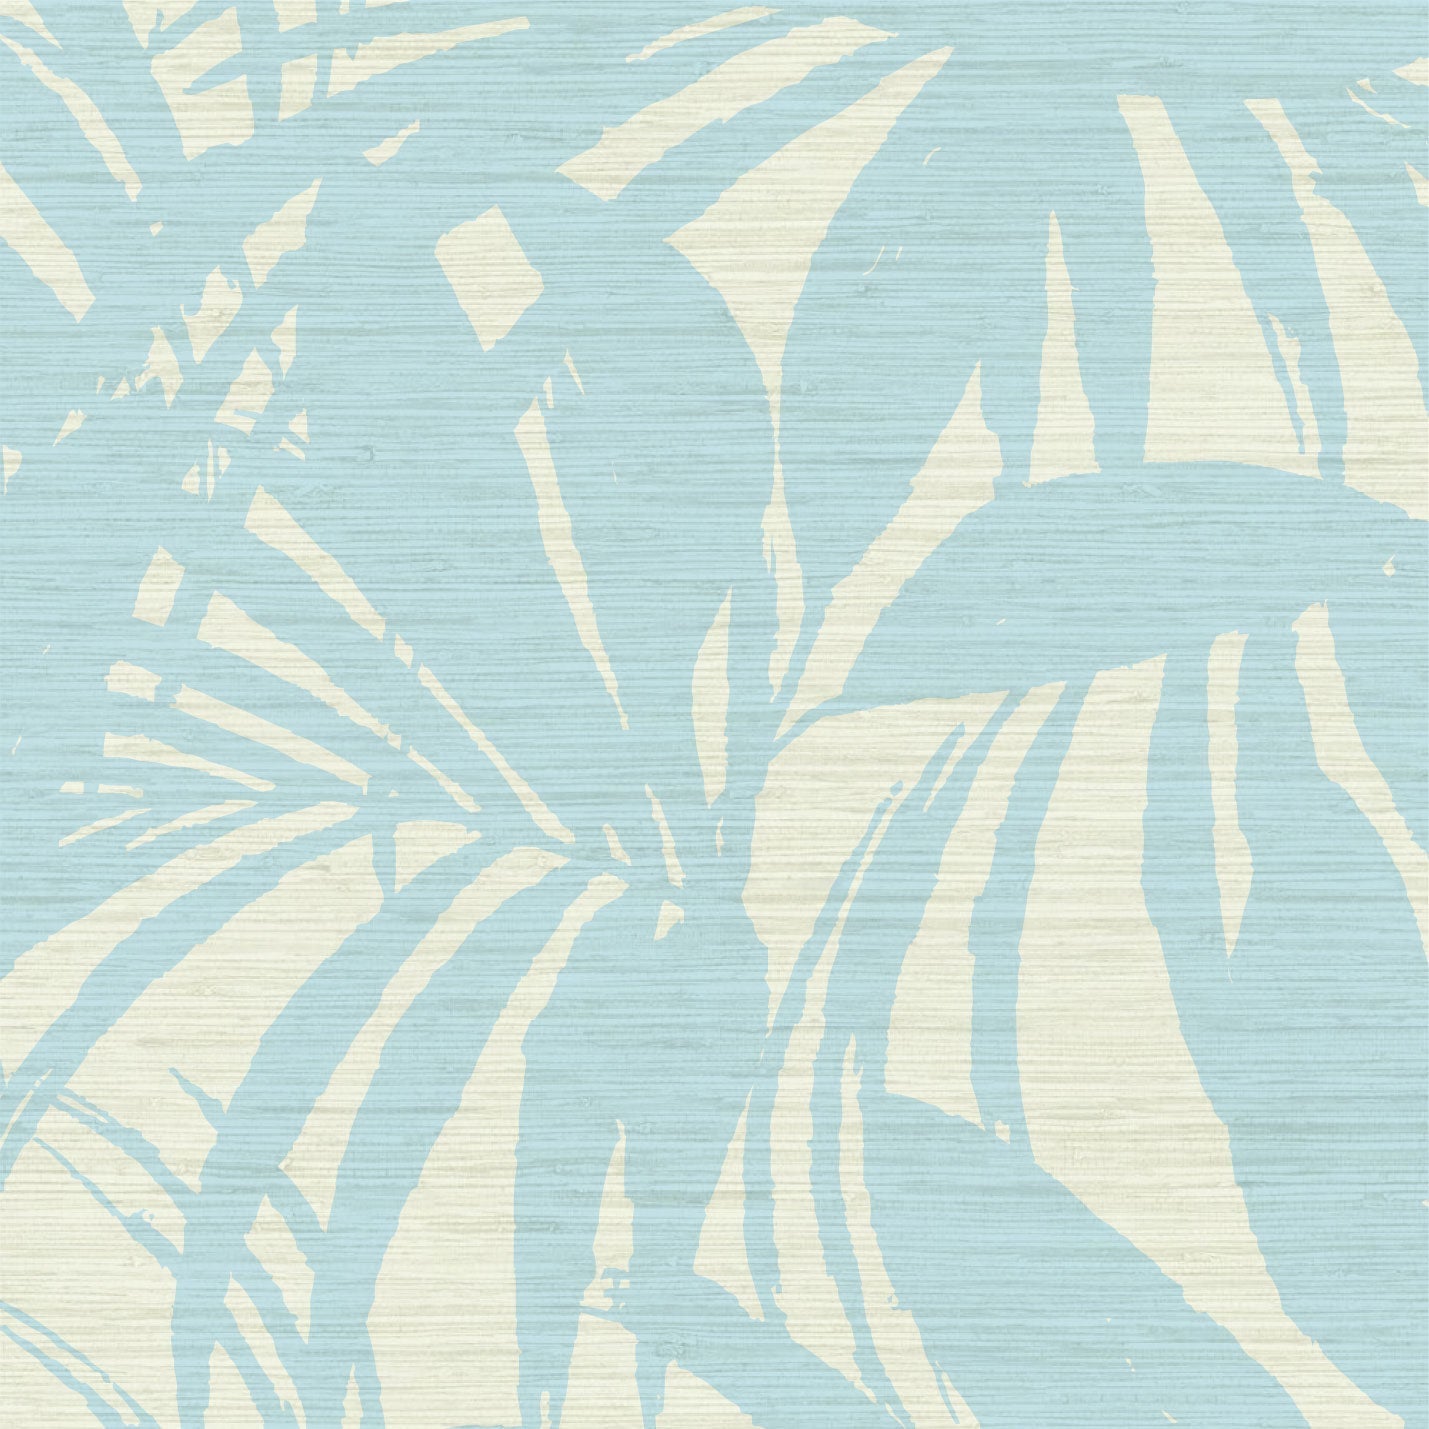 Load image into Gallery viewer, printed grasscloth wallpaper oversize tropical leaf Natural Textured Eco-Friendly Non-toxic High-quality  Sustainable practices Sustainability Interior Design Wall covering Bold retro chic custom jungle garden botanical Seaside Coastal Seashore Waterfront Vacation home styling Retreat Relaxed beach vibes Beach cottage Shoreline Oceanfront white blue sky ocean
